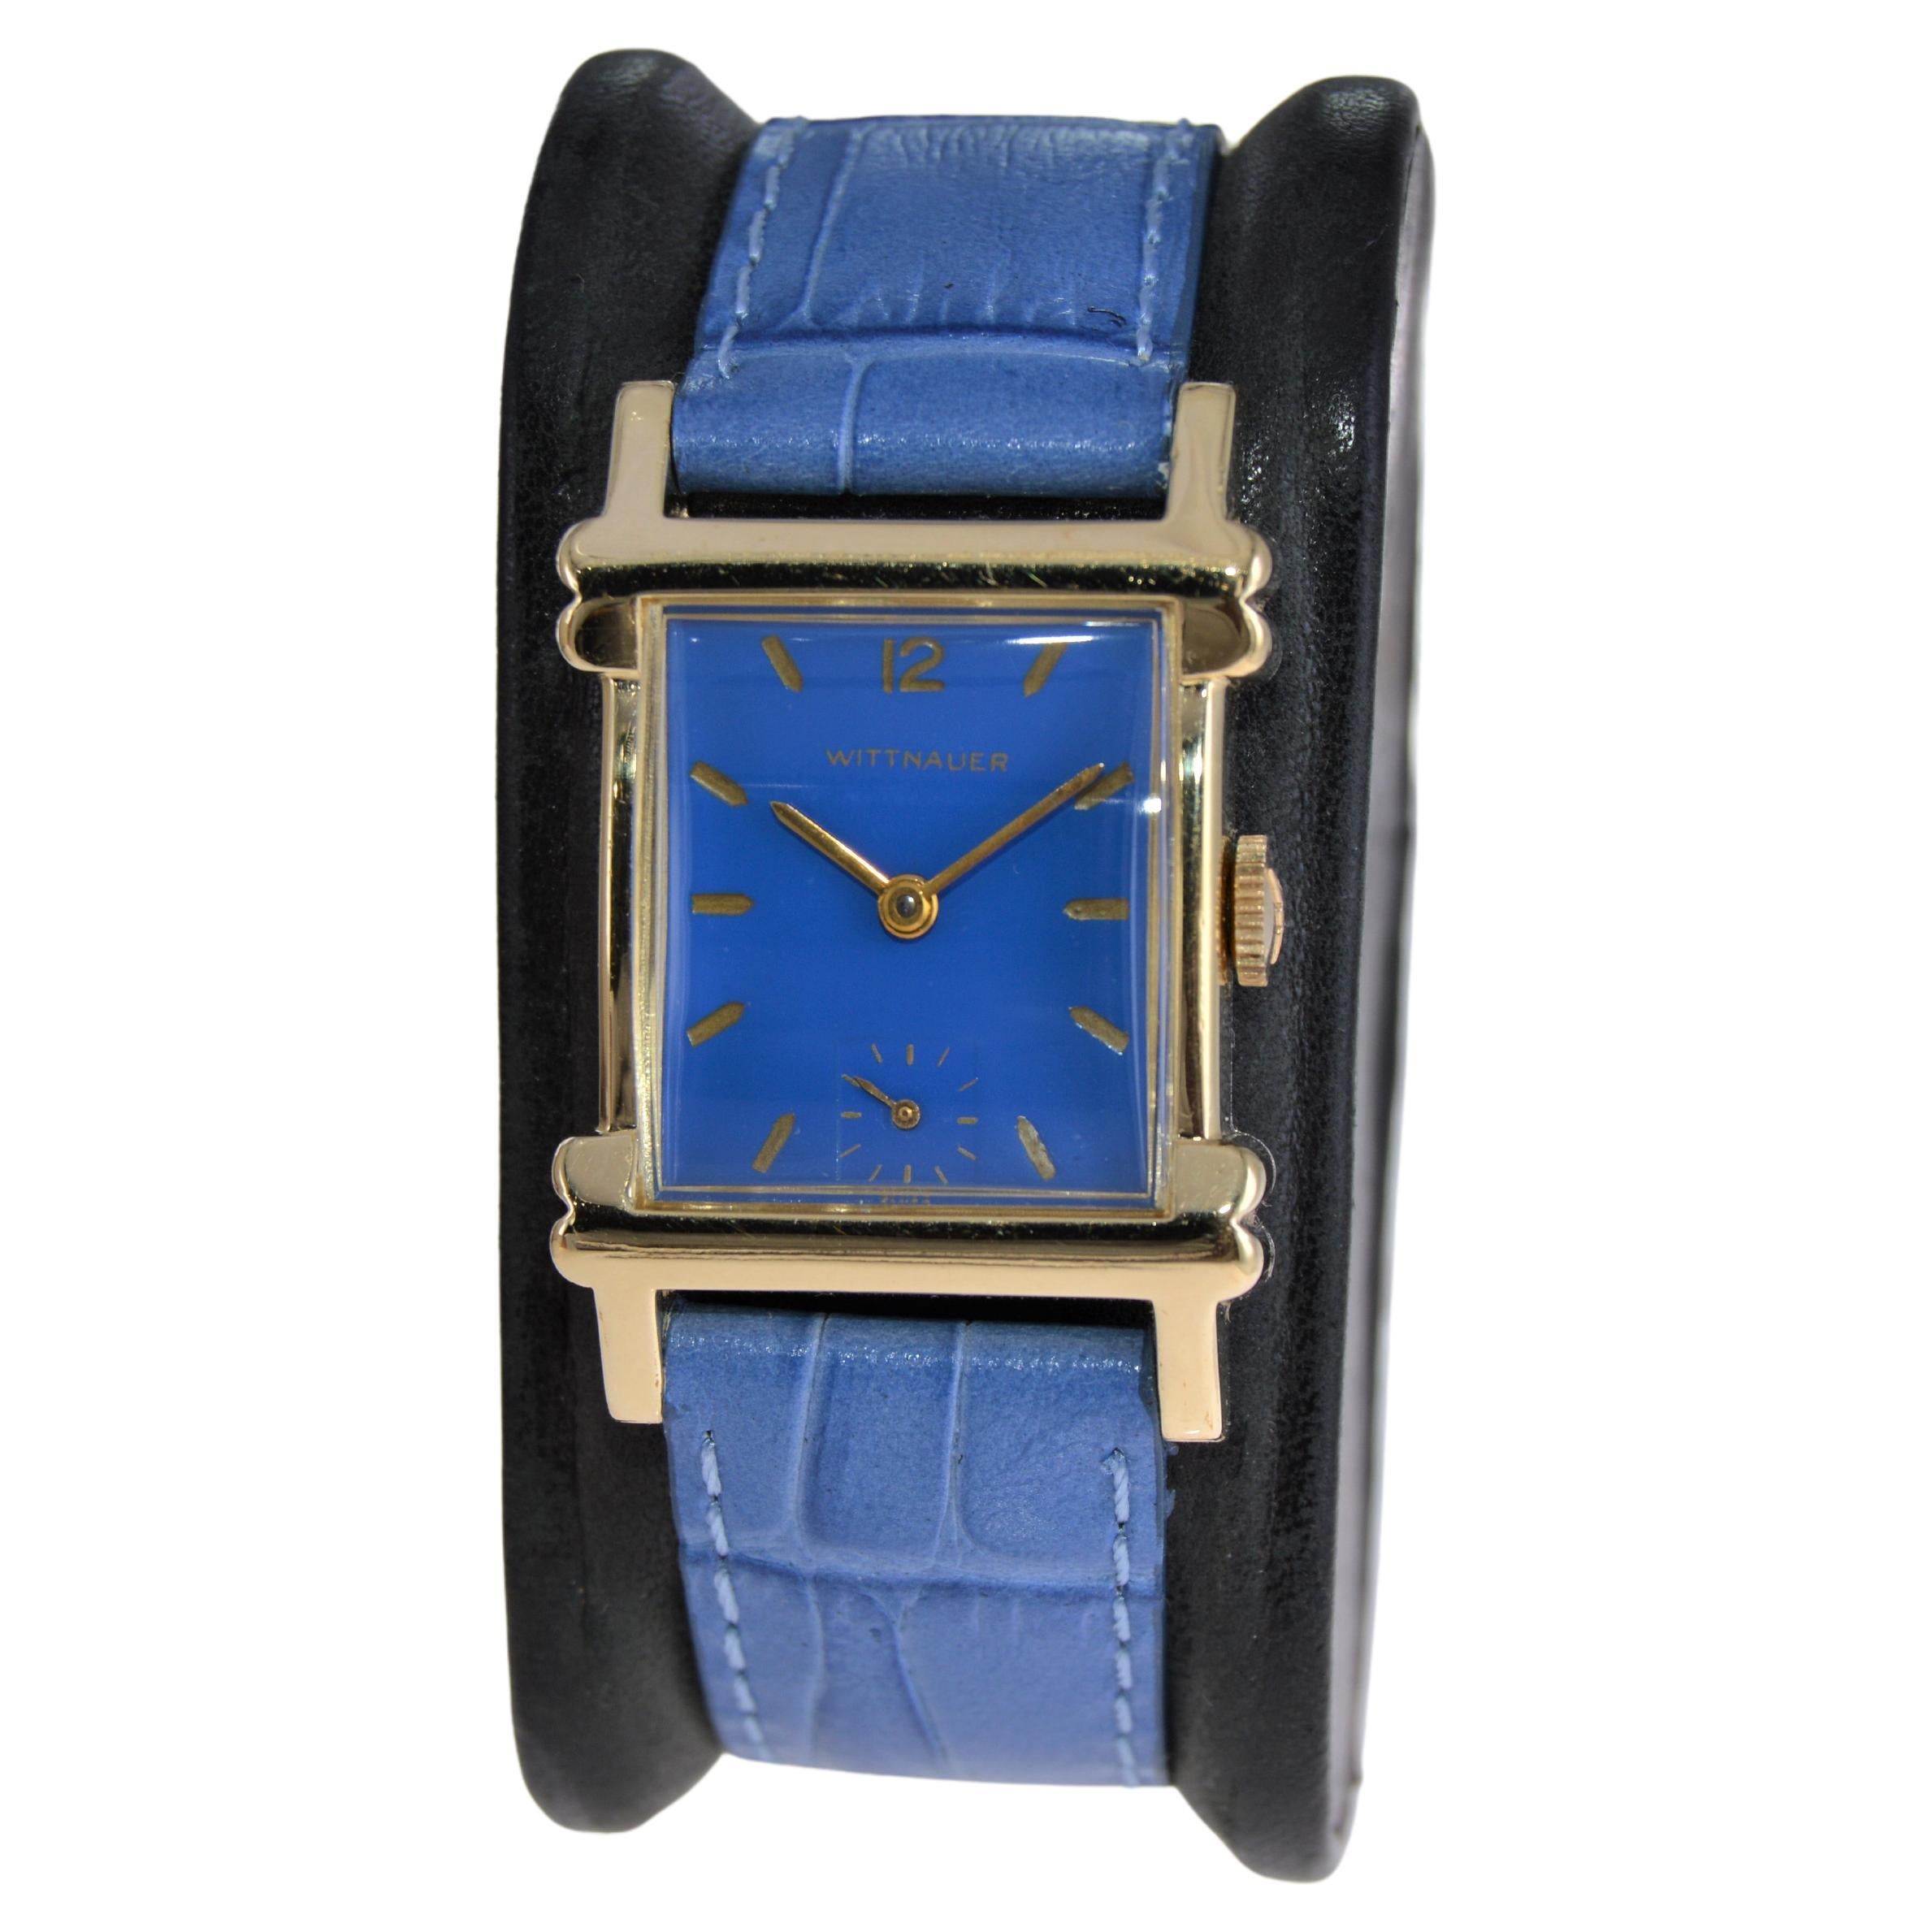 FACTORY / HOUSE: Wittnauer Watch Company 
STYLE / REFERENCE: Art Deco / Reference 5005
METAL / MATERIAL: Yellow Gold Filled
CIRCA / YEAR: 1940's
DIMENSIONS / SIZE: 38mm Length X 26mm Width
MOVEMENT / CALIBER: Manual Winding / 17 Jewels / Caliber